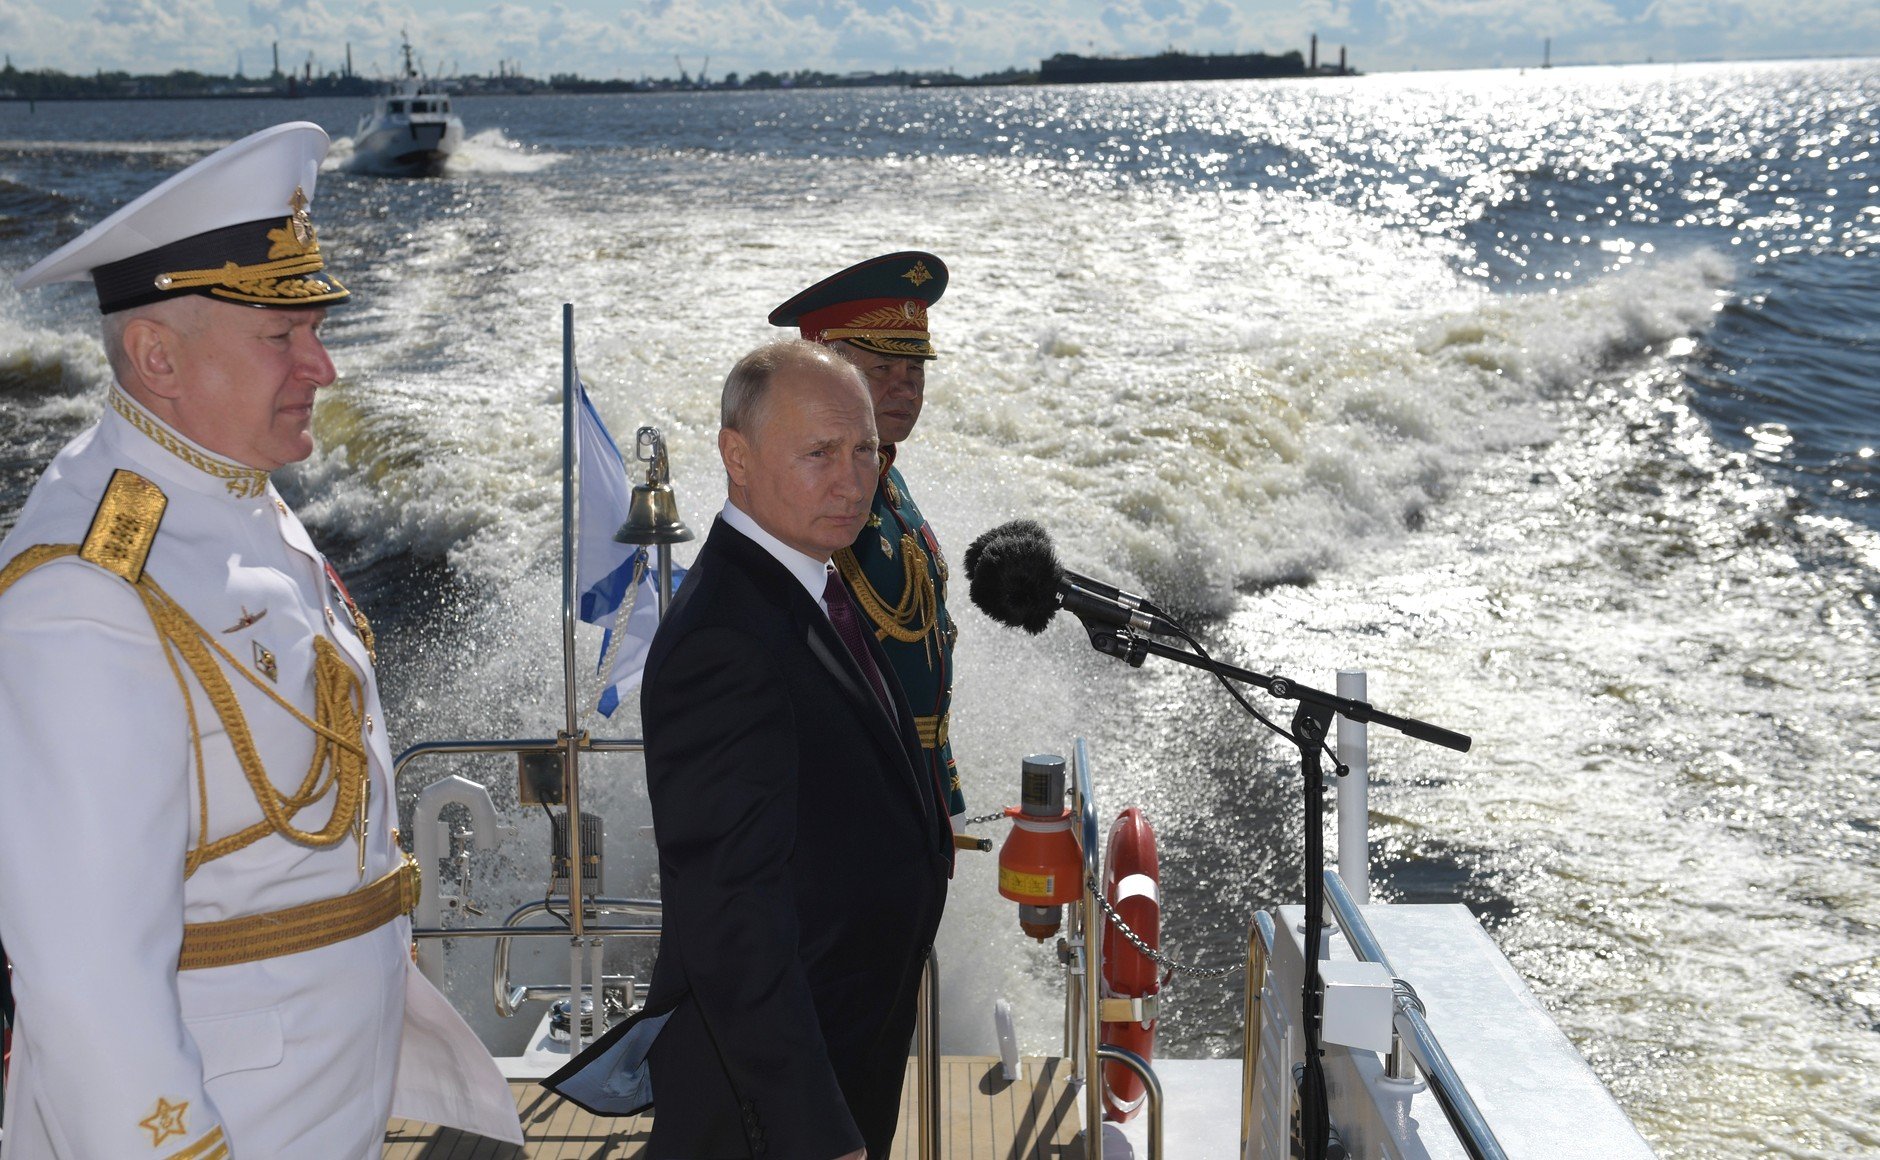 Russian President Vladimir Putin from a cutter reviewed Russian fleet formations during the Main Naval Parade on July 26, 2020. With Defence Minister Sergei Shoigu (right) and Commander-in-Chief of the Russian Navy Nikolai Evmenov. Photo courtesy of President of Russia website.